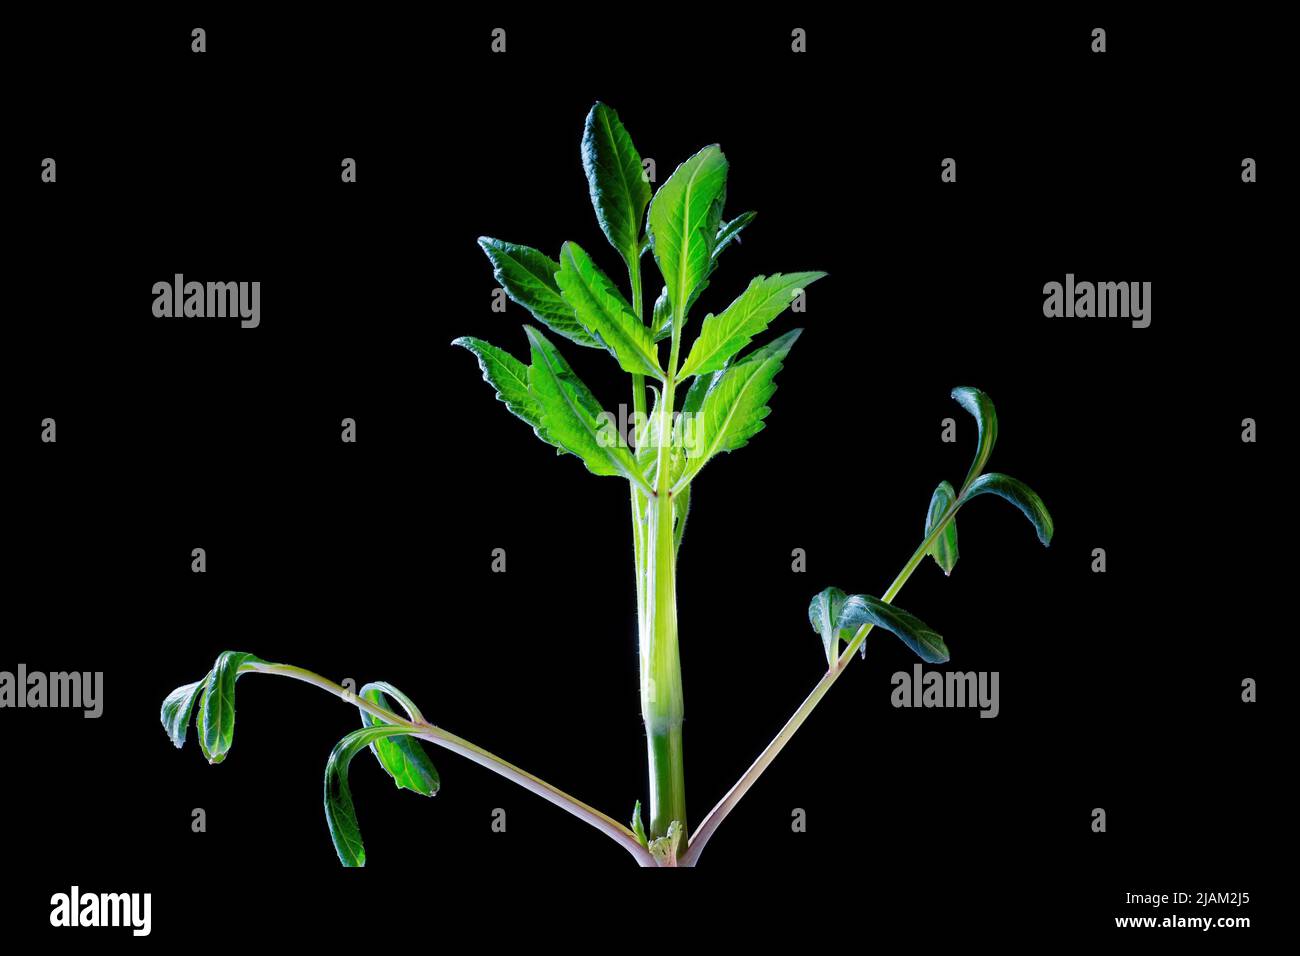 Growing dahlia plant with blossoming leaves extreme close up isolated on black background. Stock Photo